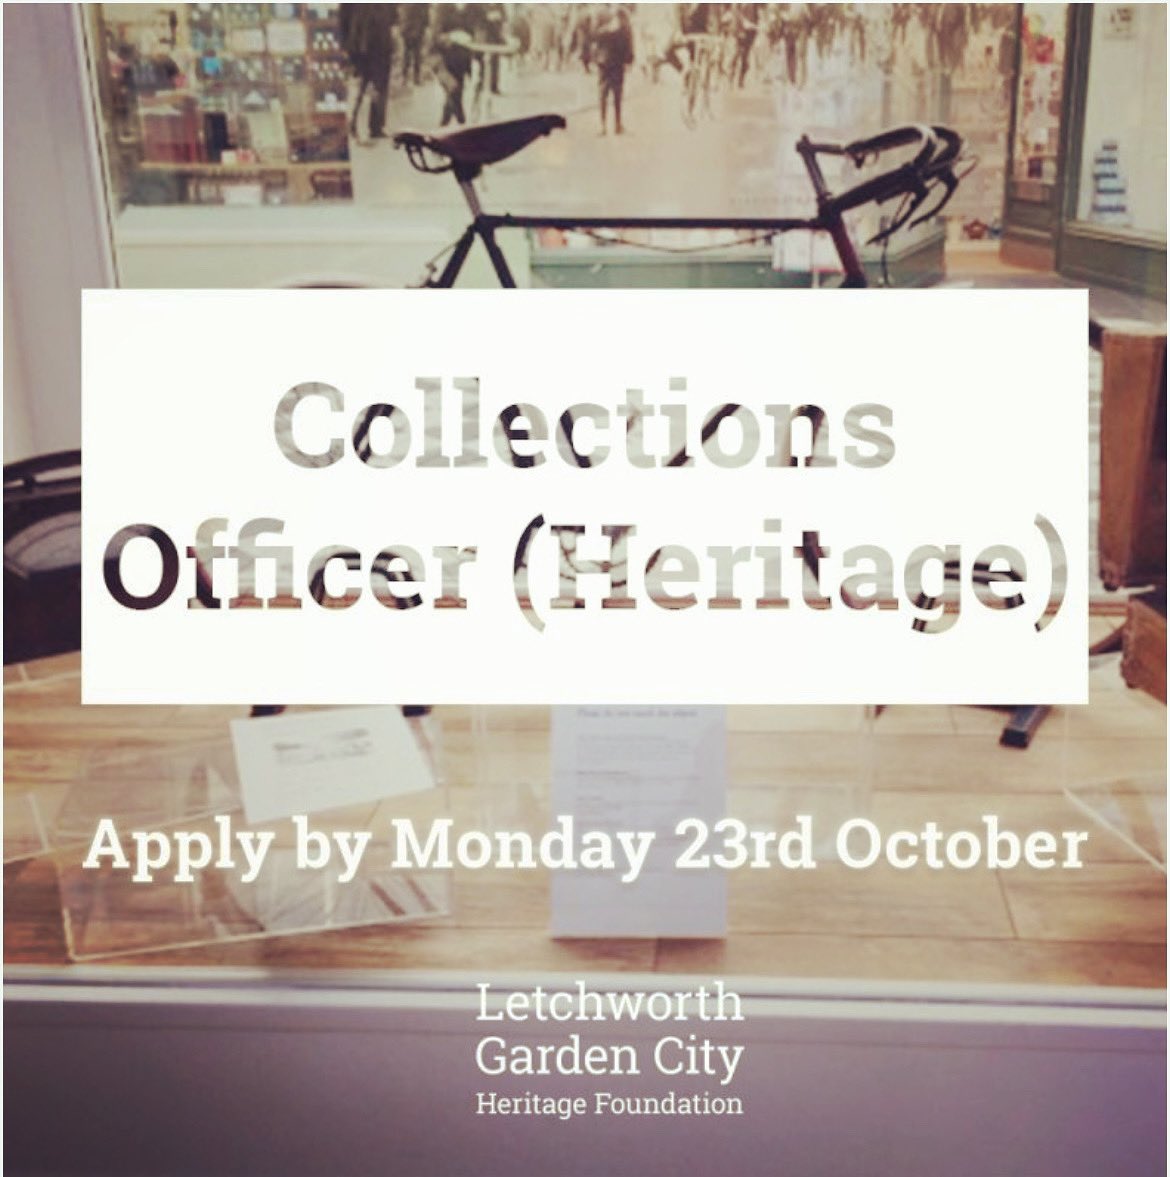 We’re Hiring! We are looking for a Collections Officer to engage with Letchworth’s range of communities and help make the Garden City Collection more diverse, accessible and representative… 1/ Find out more here: letchworth.com/work-for-us/co…